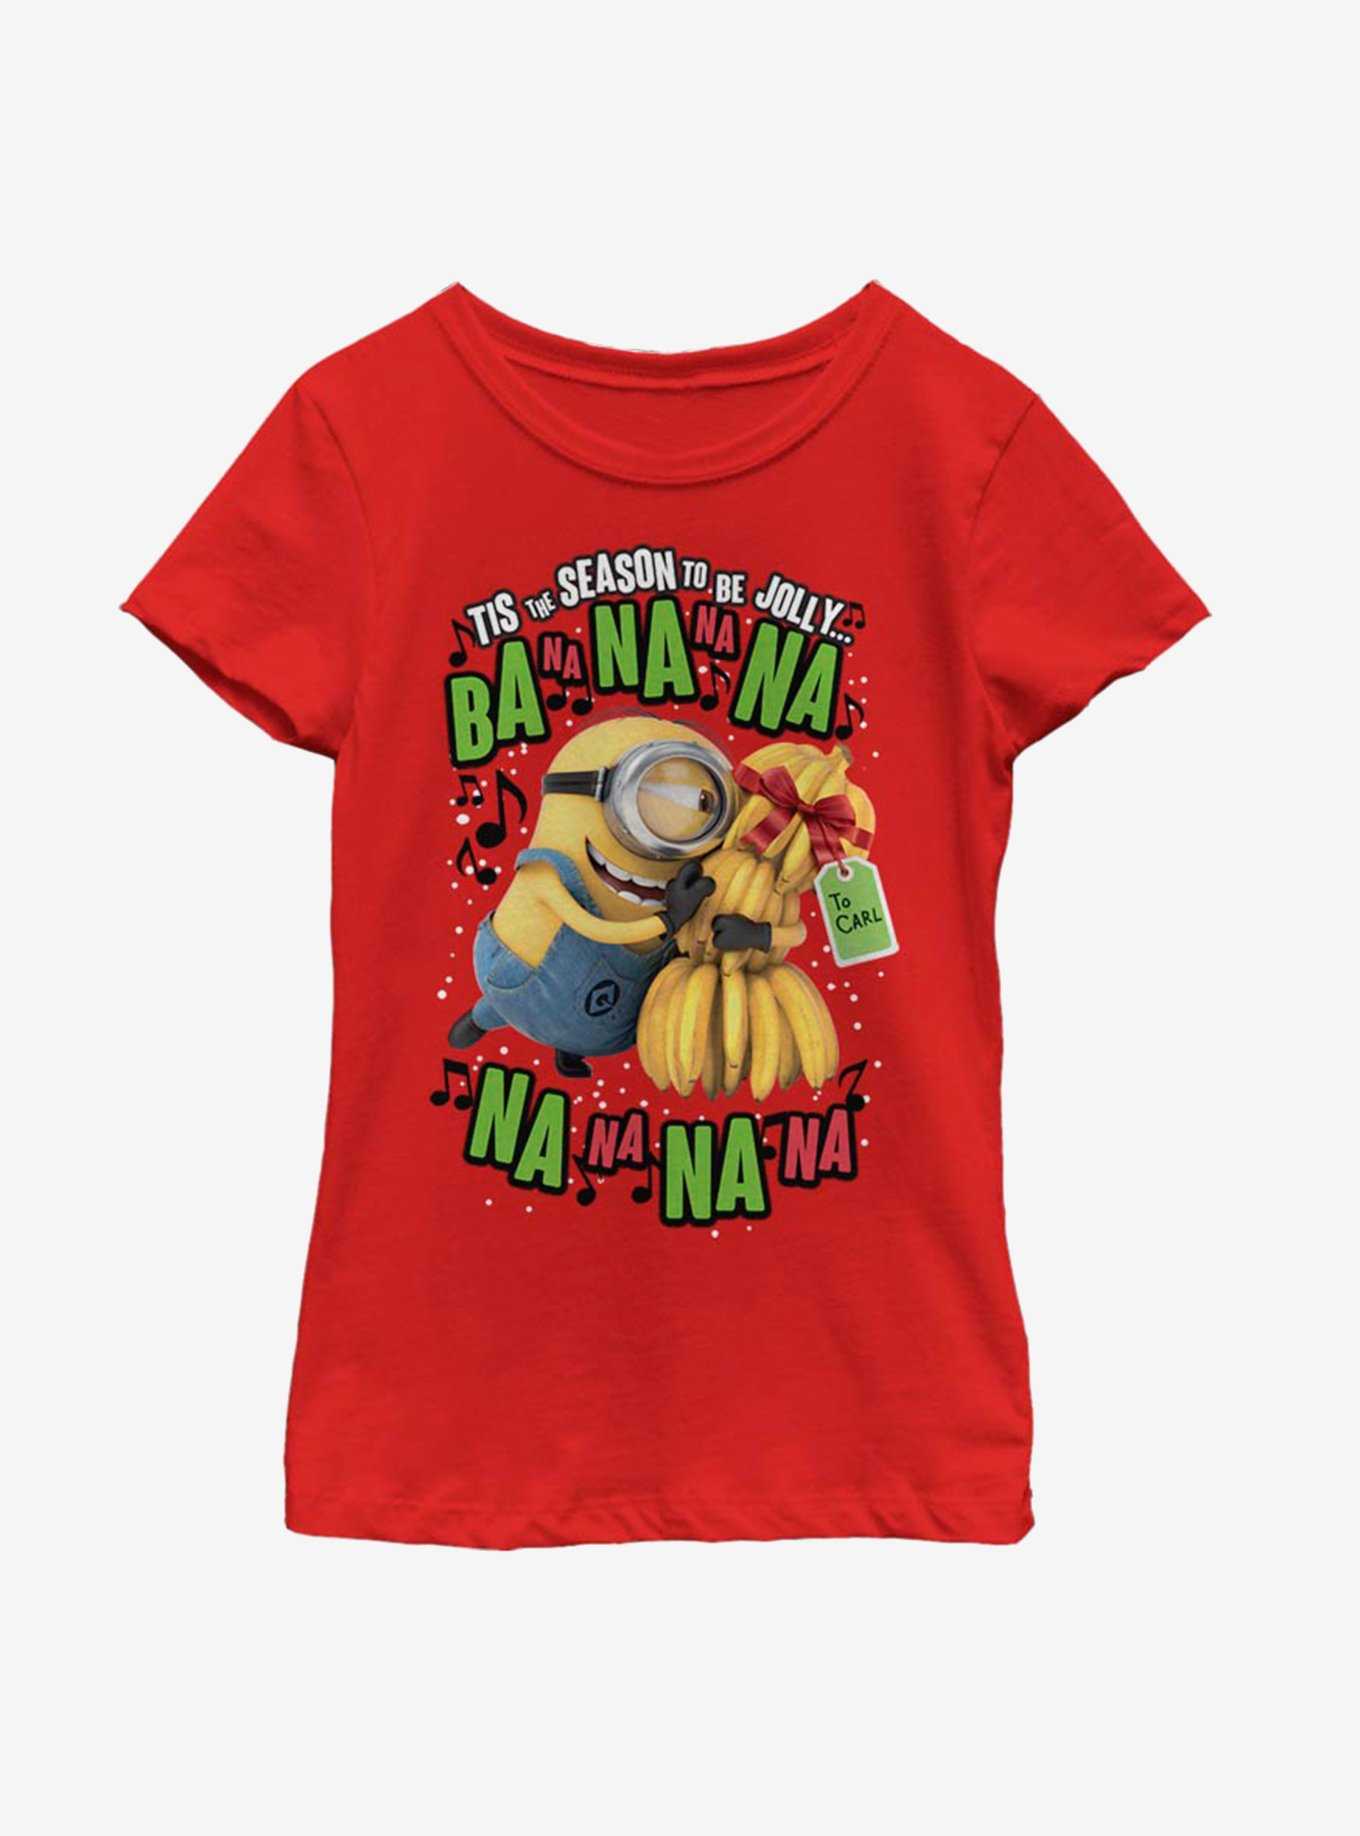 Despicable Me Minions Deck The Halls Youth Girls T-Shirt, , hi-res